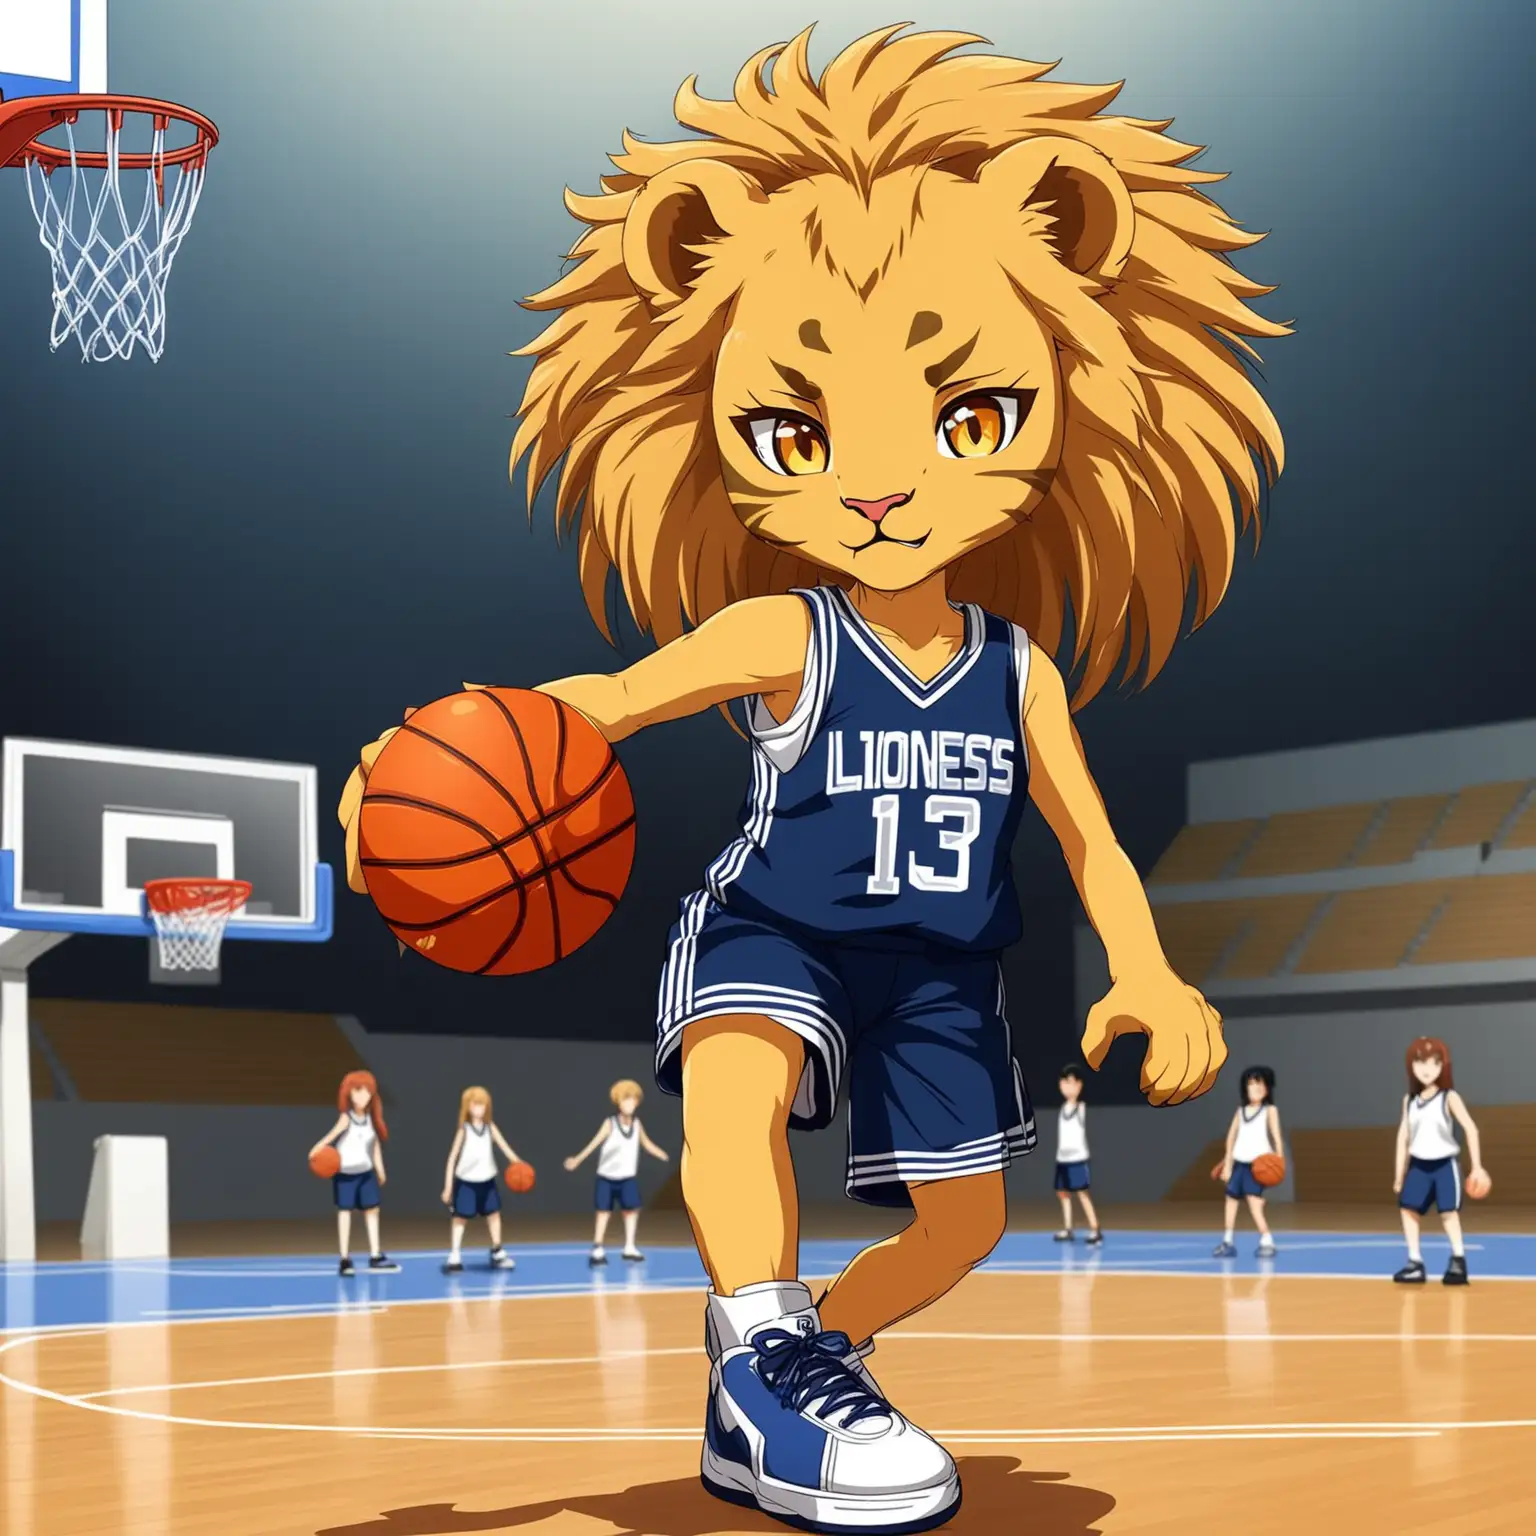 Anime Lioness Playing Basketball on a Vibrant Court in White Blue and Navy Blue Uniform